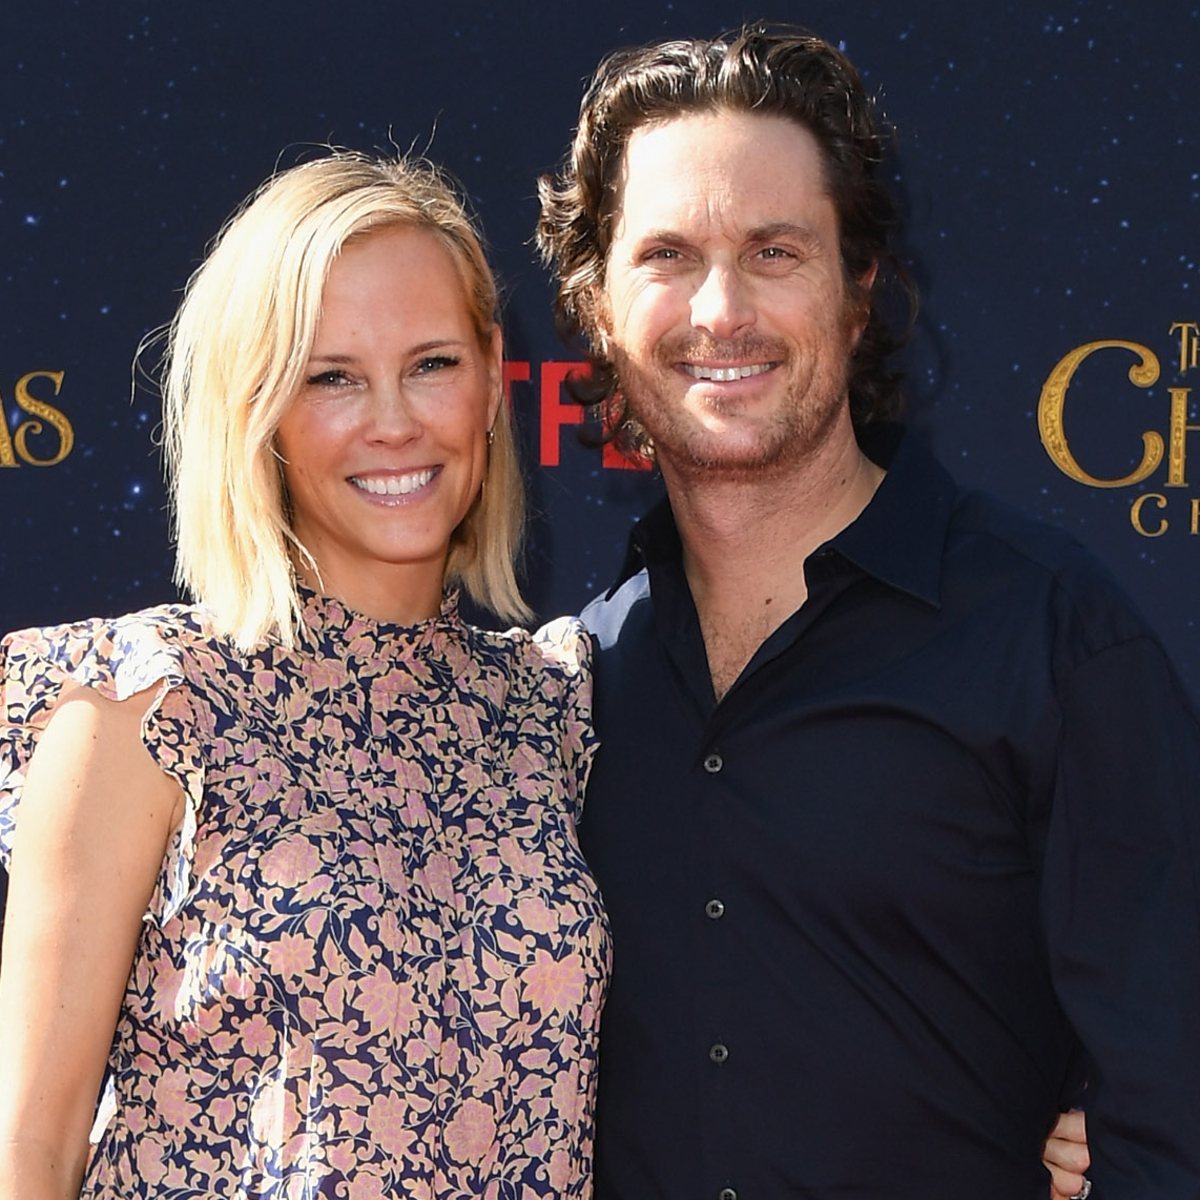 Oliver Hudson Admits to Cheating on Wife Erinn Bartlett Before They Got Married